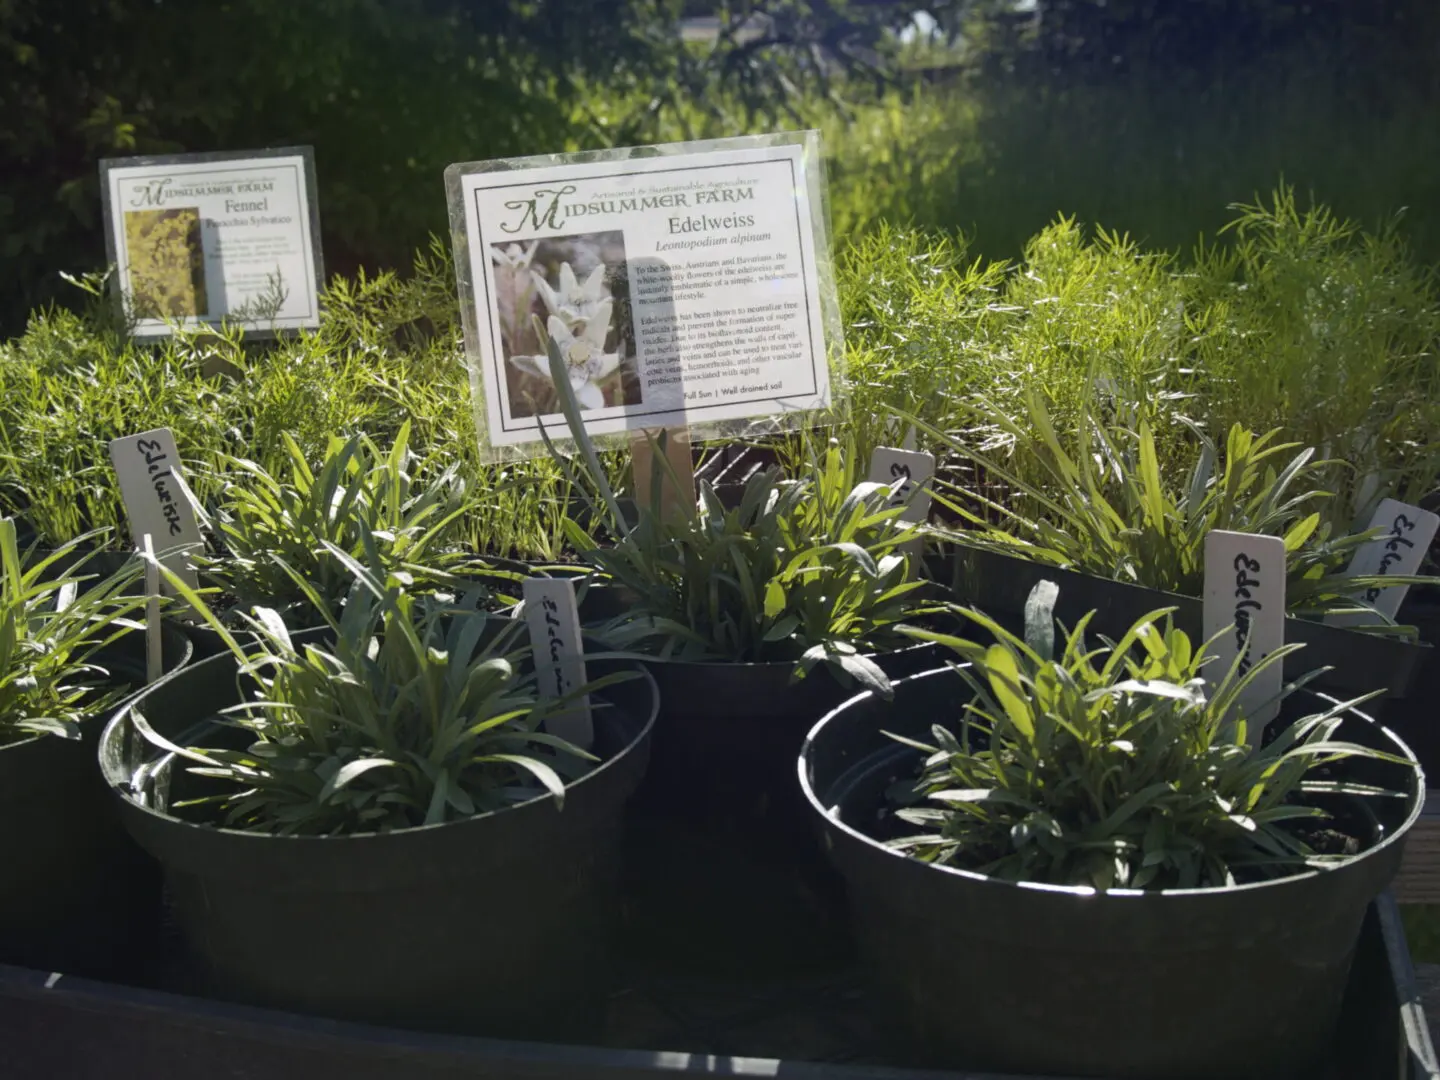 Edelweiss plants on the display of the website